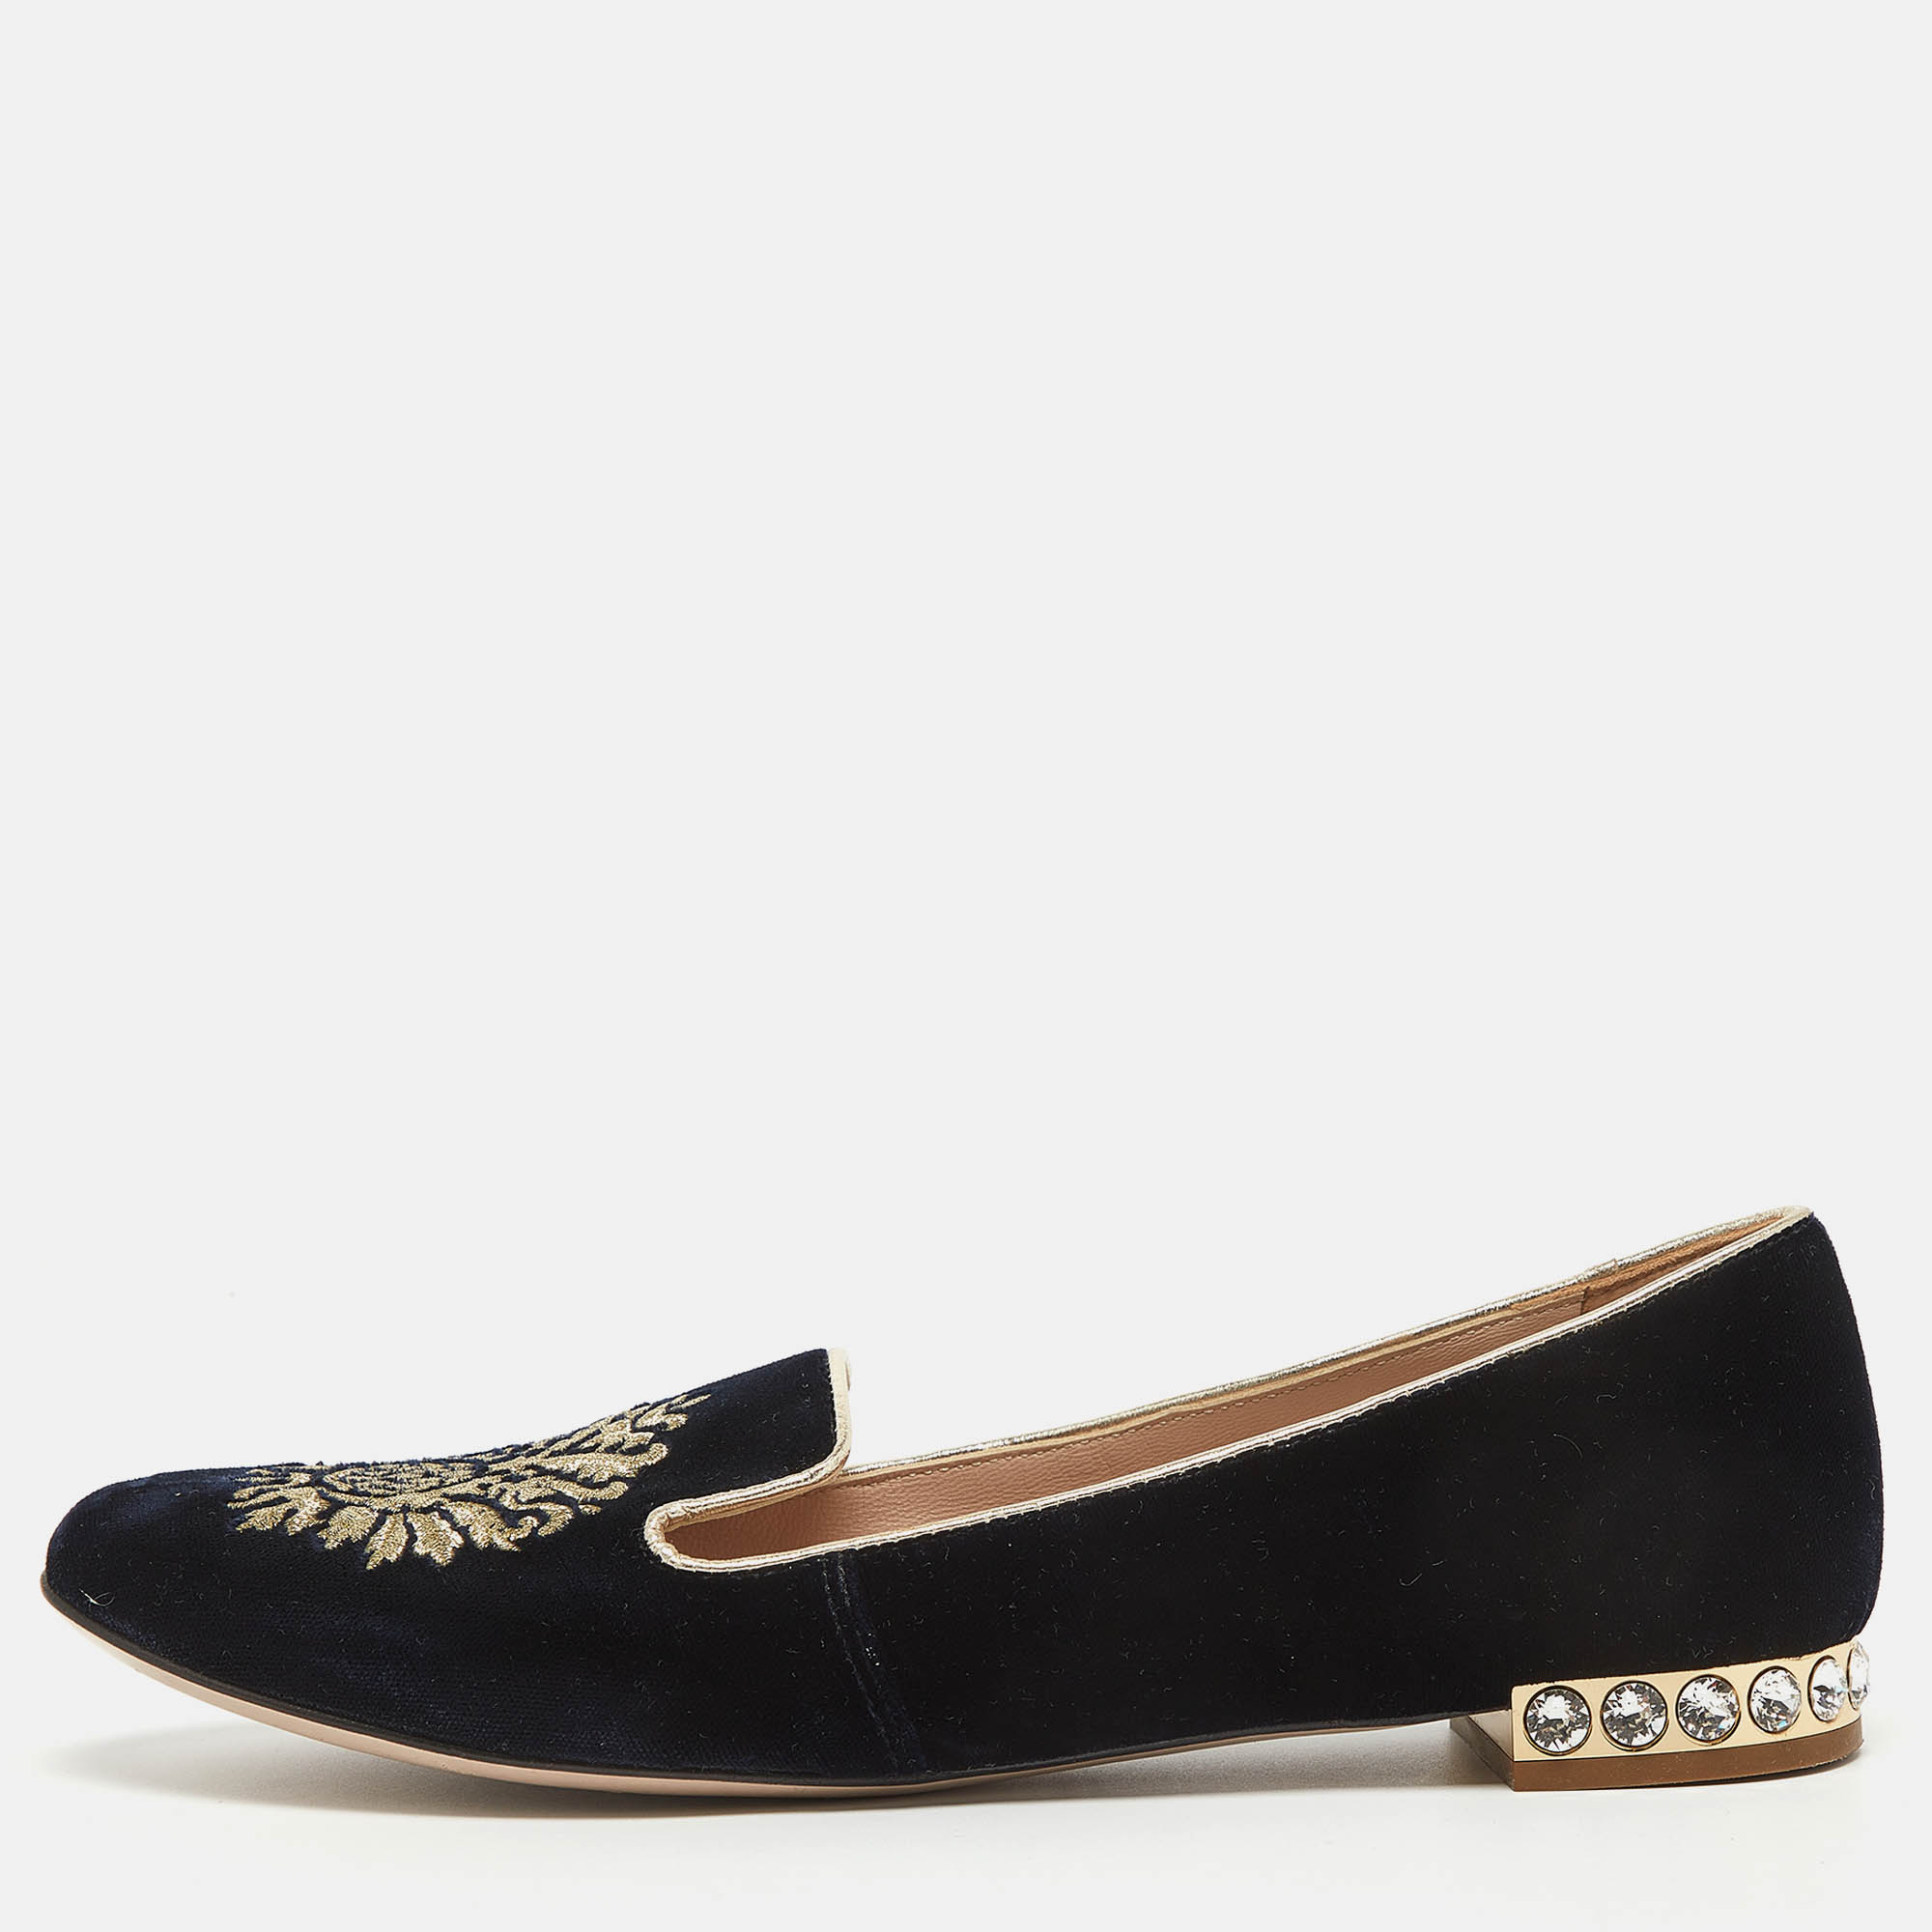 Pre-owned Miu Miu Navy Blue Velvet Embroidered Crystal Embellished Smoking Slippers Size 36.5